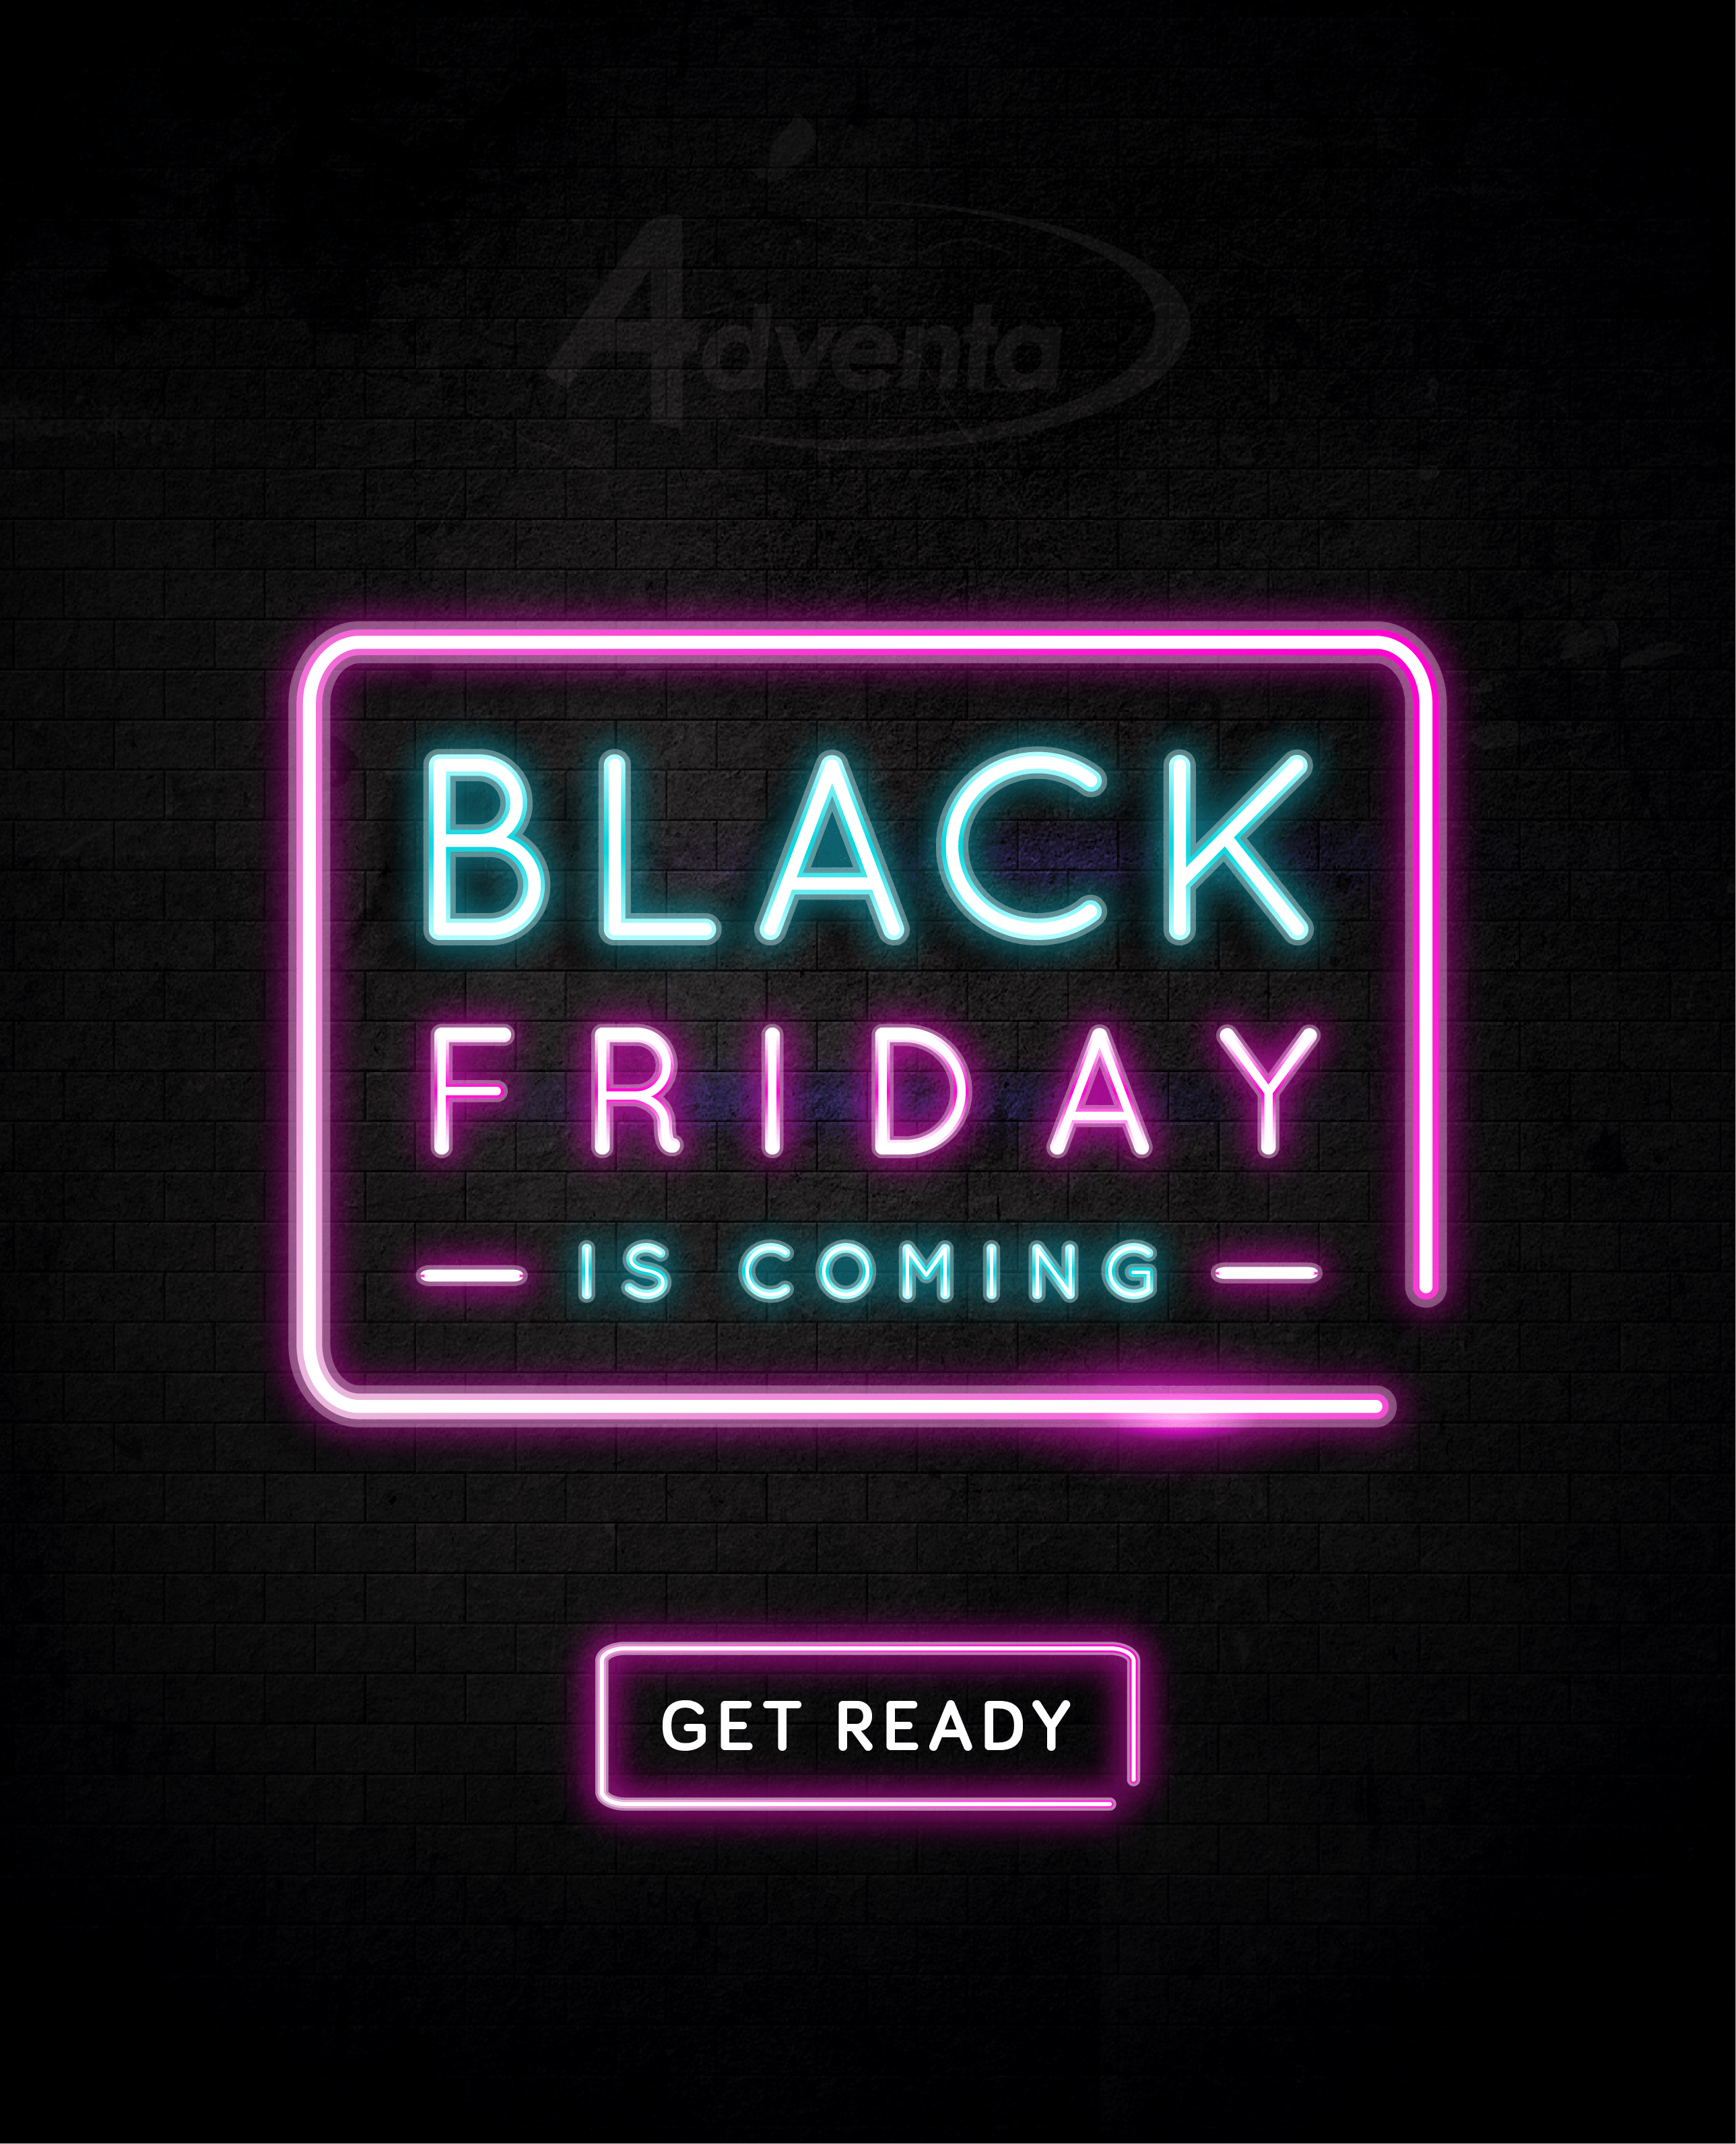 Black Friday is coming!...